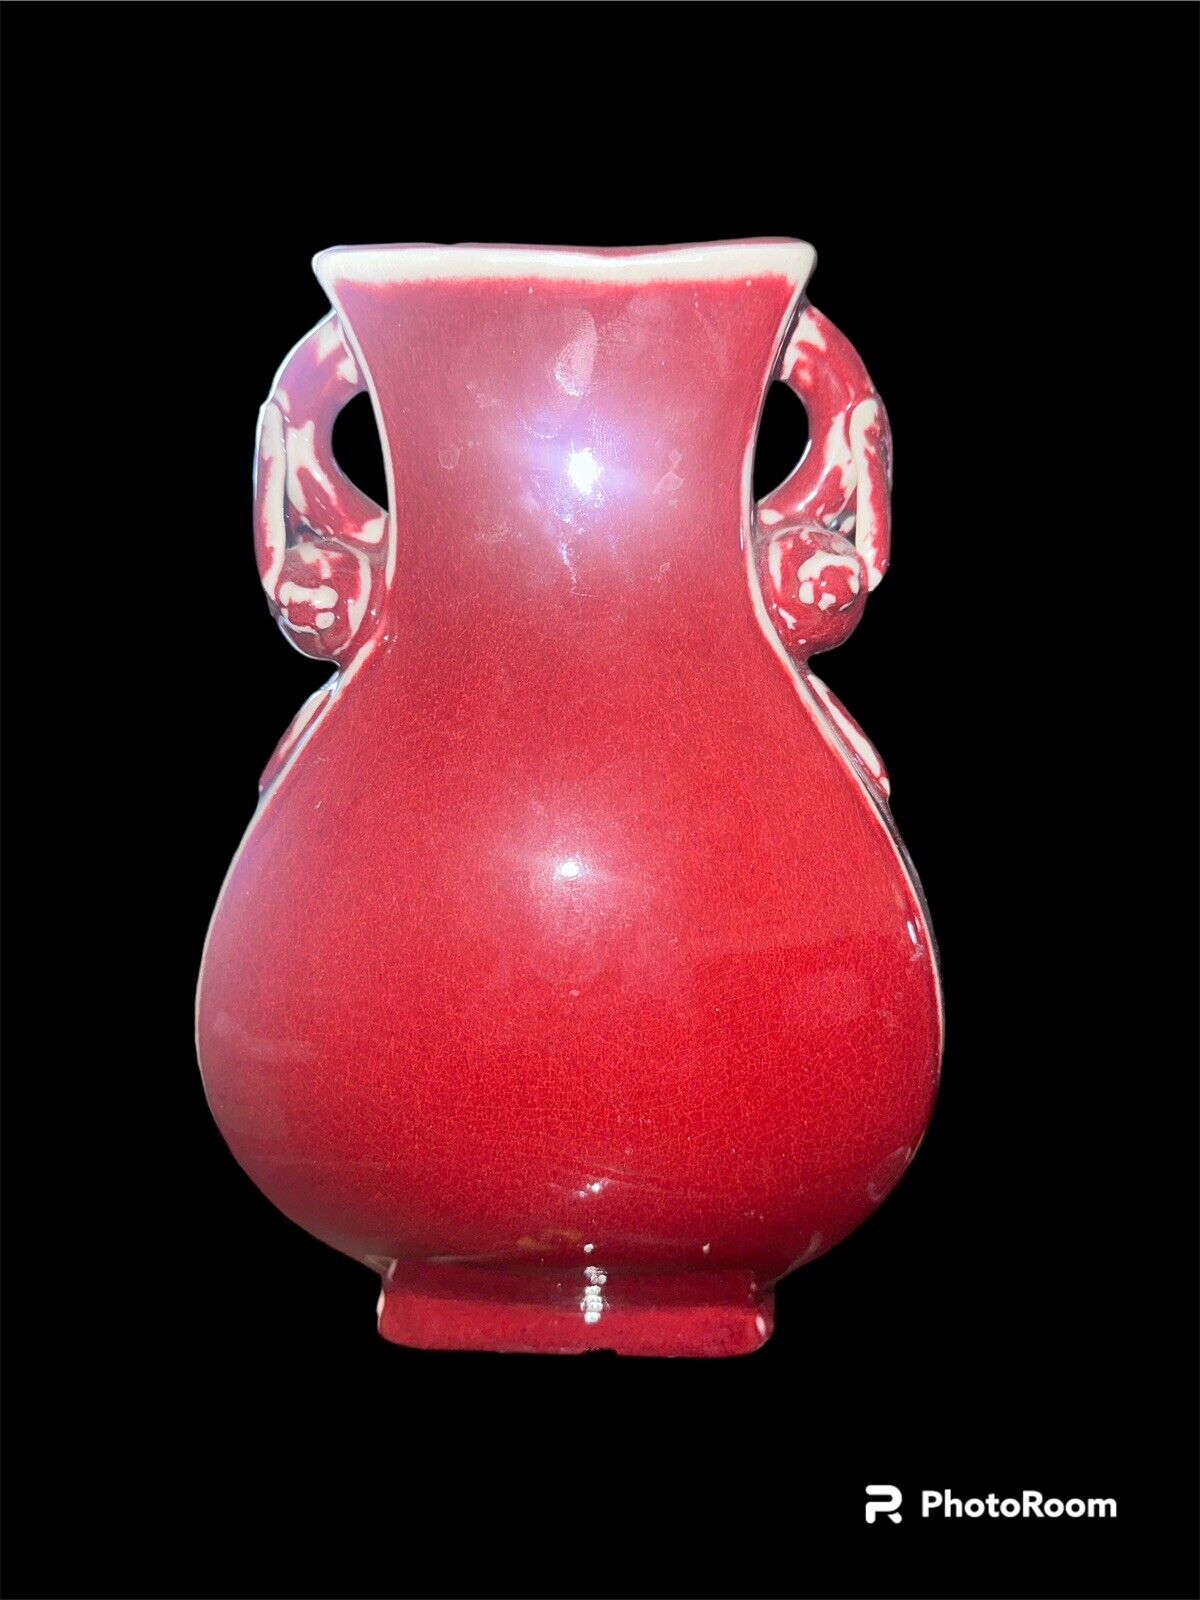 The Vintage Ox Red Chinese Porcelain Vase 9\'\' X 6” Stunning